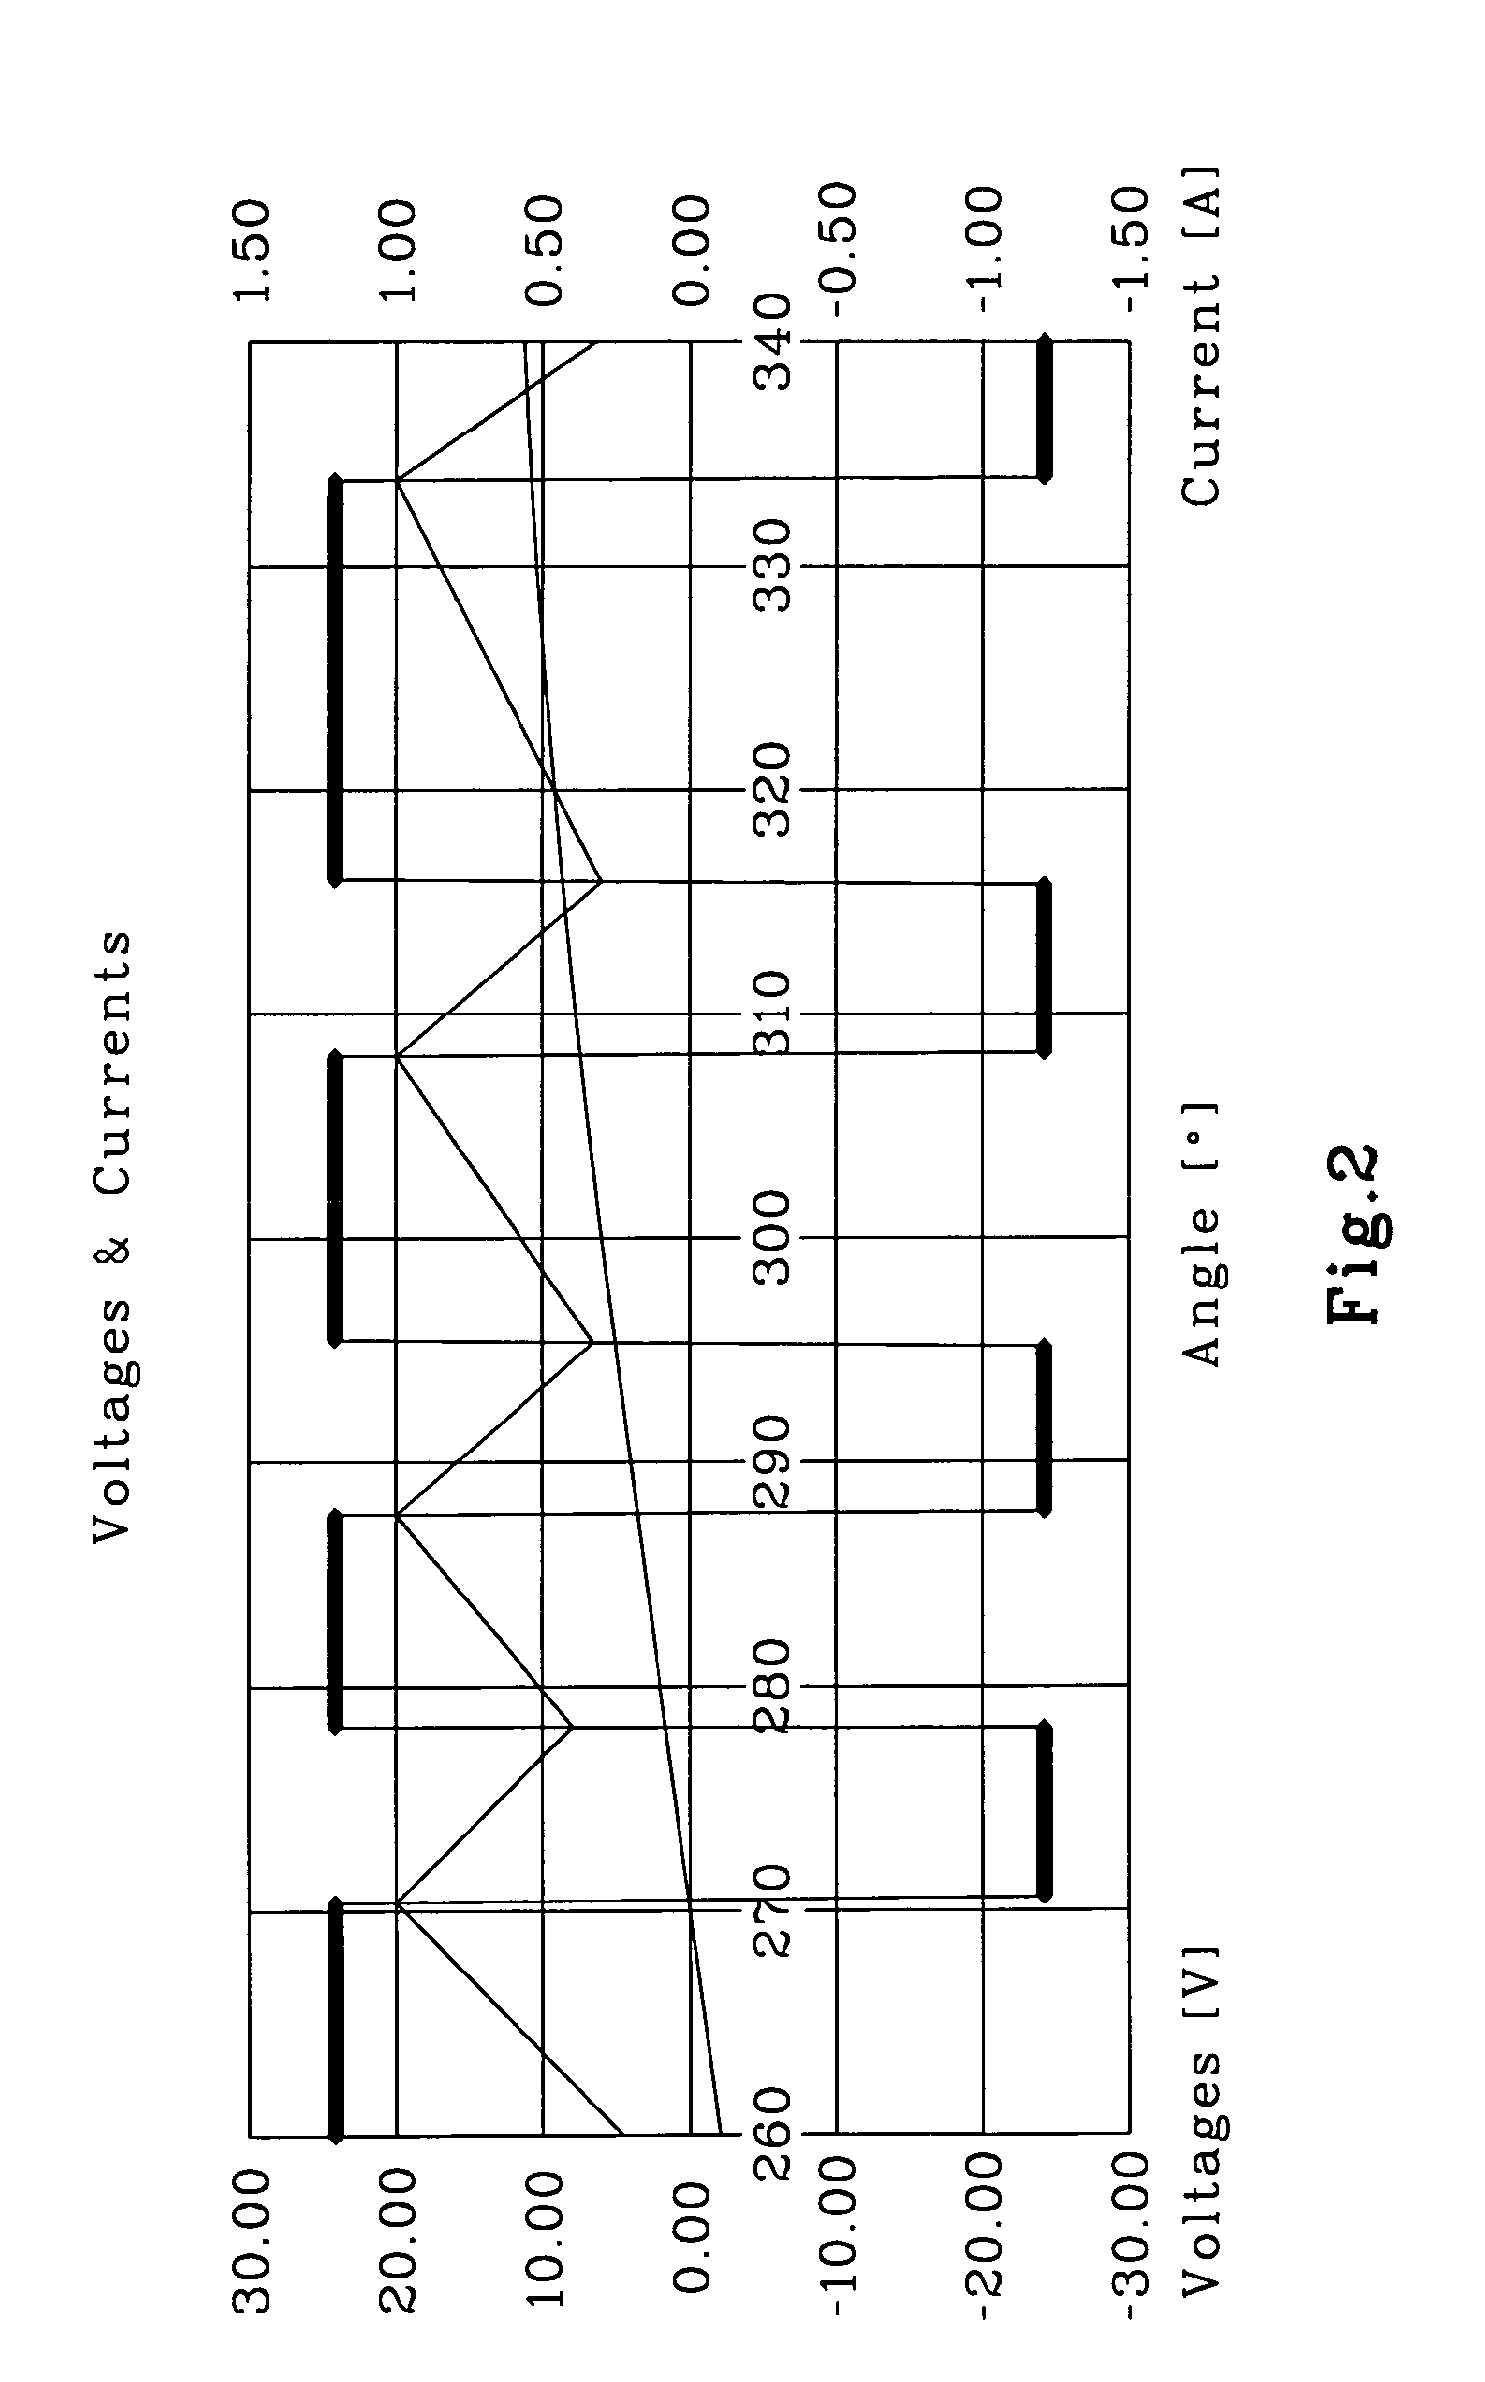 Sensorless technology, estimation of sampled back EMF voltage values and/or the sampled inductance values based on the pulse width modulation periods